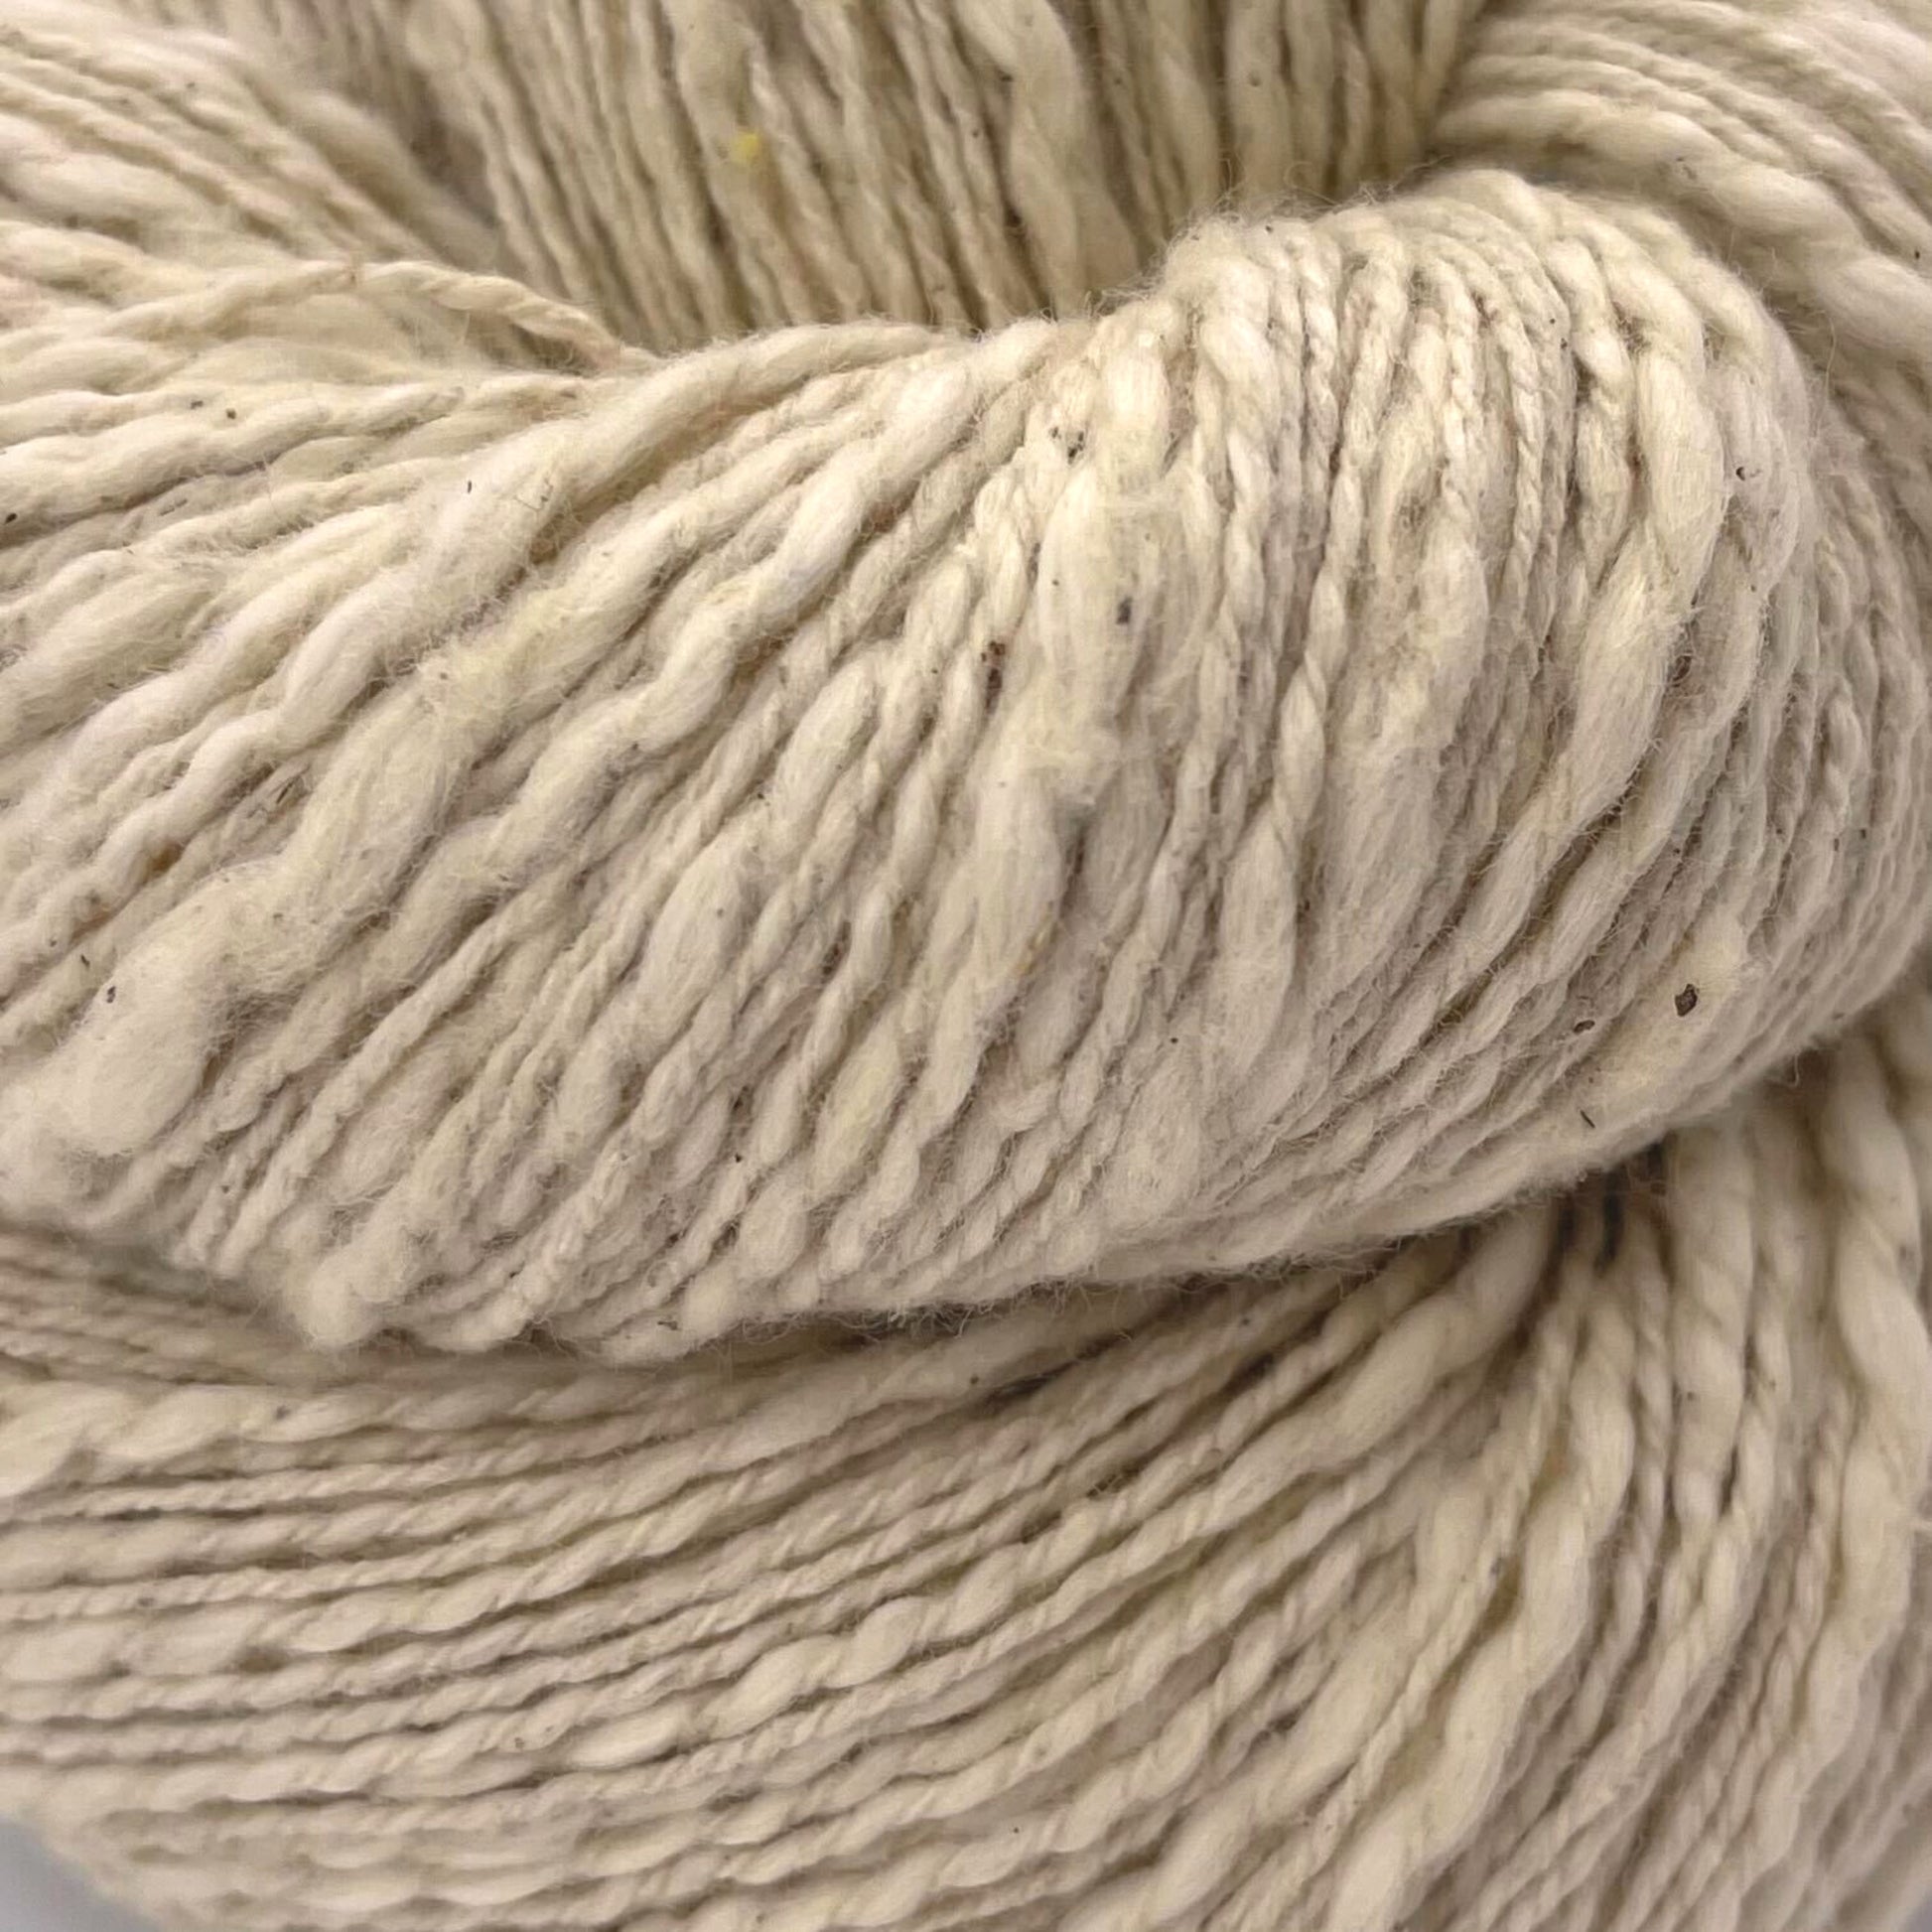 A close up of a skein of white/ undyed cotton yarn on a white background